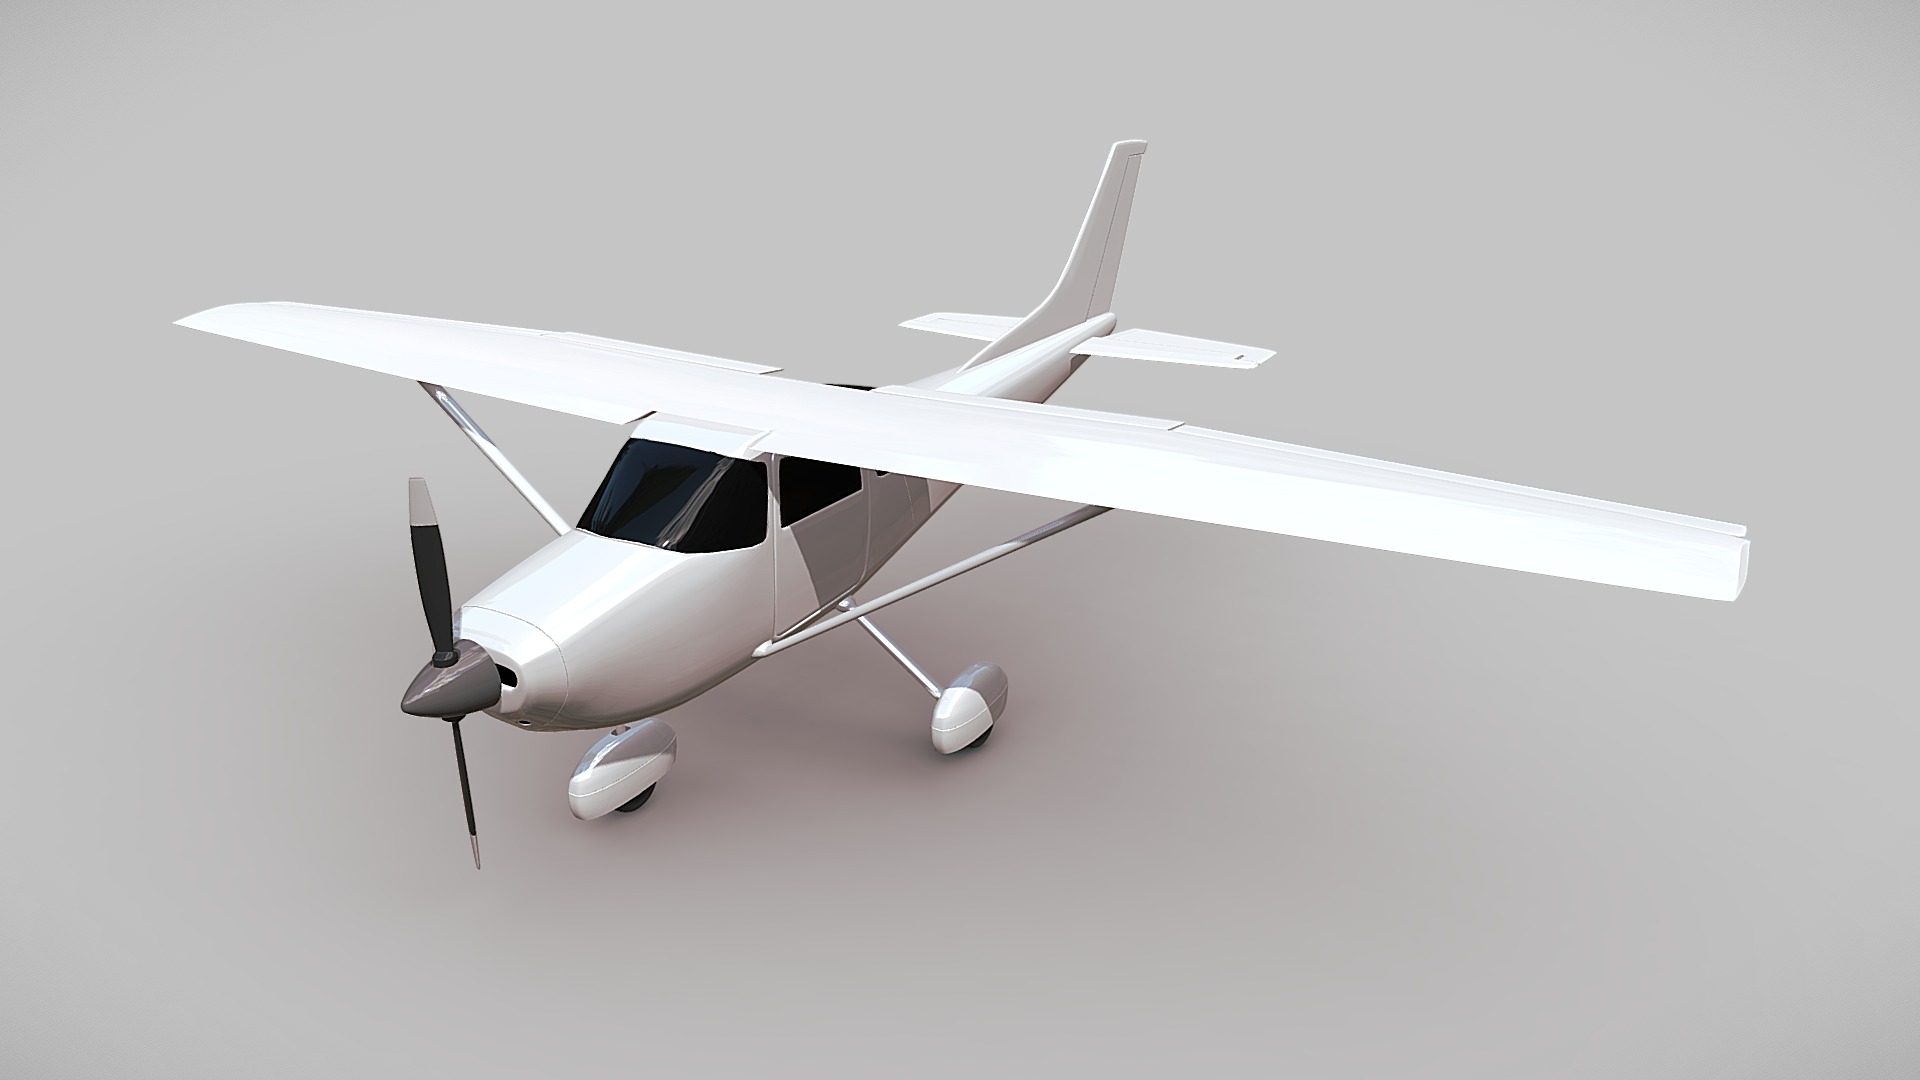 3D model Cessna 182 Skyline propeller plane - This is a 3D model of the Cessna 182 Skyline propeller plane. The 3D model is about a small white airplane.